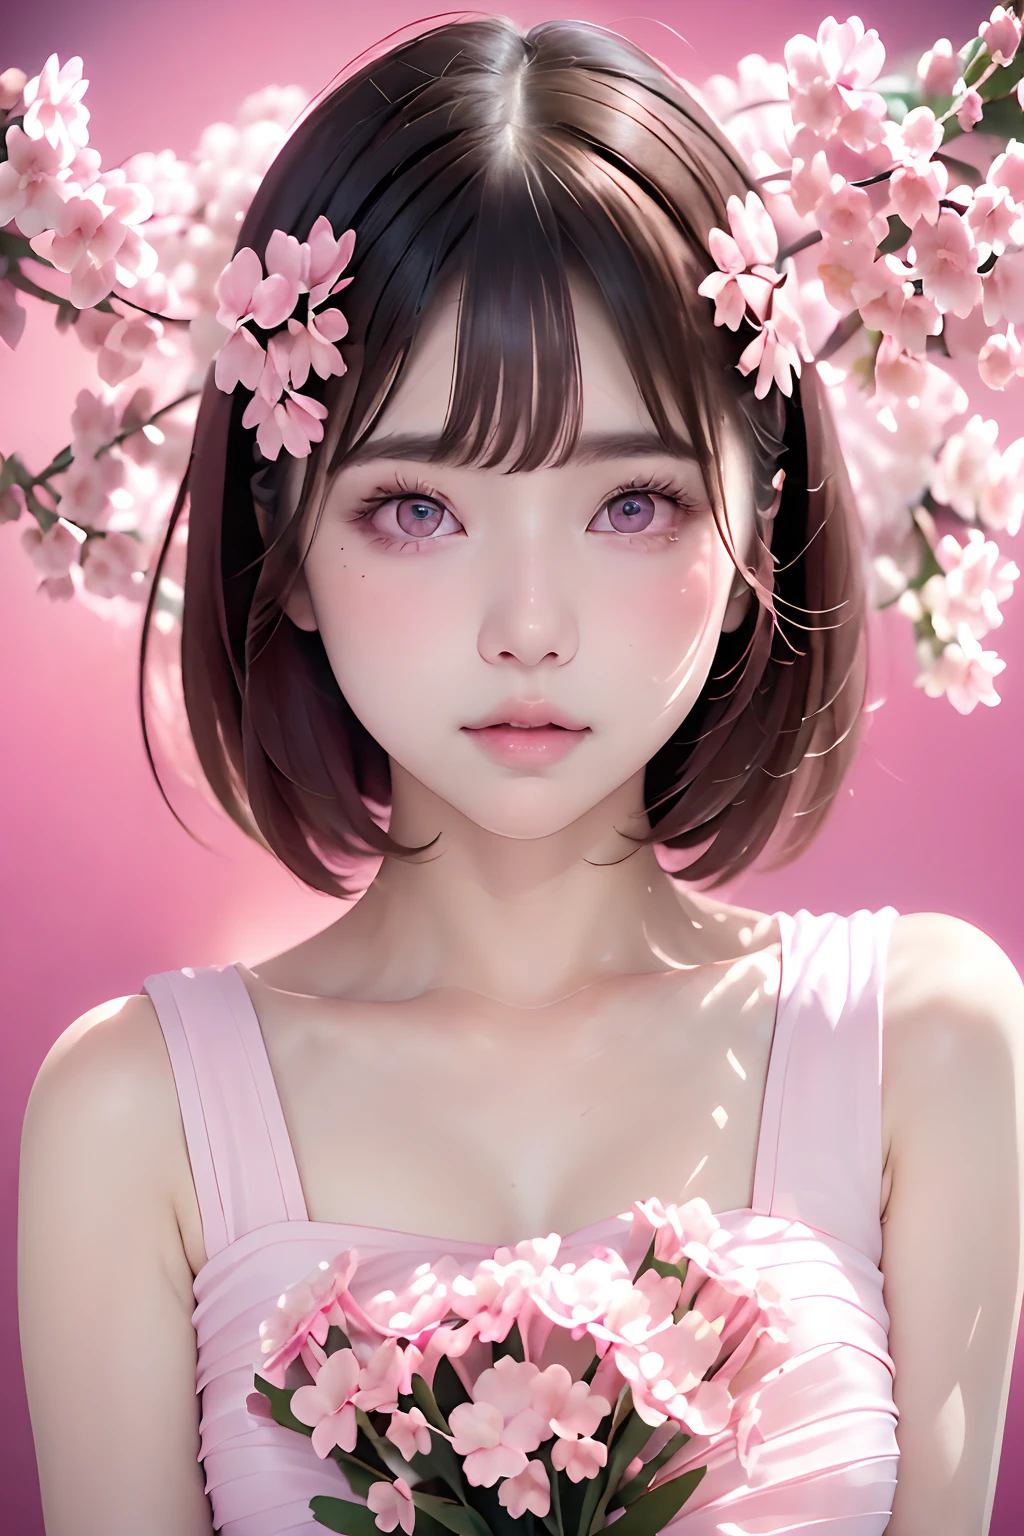 (((Pink background:1.3)))、((Bouquet of pink flowers、Large bouquet of pink flowers、Have a large bouquet of pink flowers:1.5))、Best Quality, masutepiece, High resolution, (((1girl in))), sixteen years old,(((Pink eyes:1.3)))、pink  dress、((PINK SHIRT:1.3、Pink Block Dress)), Tindall Effect, Realistic, Shadow Studio,Ultramarine Lighting, dual-tone lighting, (High Detail Skins: 1.2)、Pale colored lighting、Dark lighting、 Digital SLR, Photo, High resolution, 4K, 8K, Background blur,Fade out beautifully、Pink World